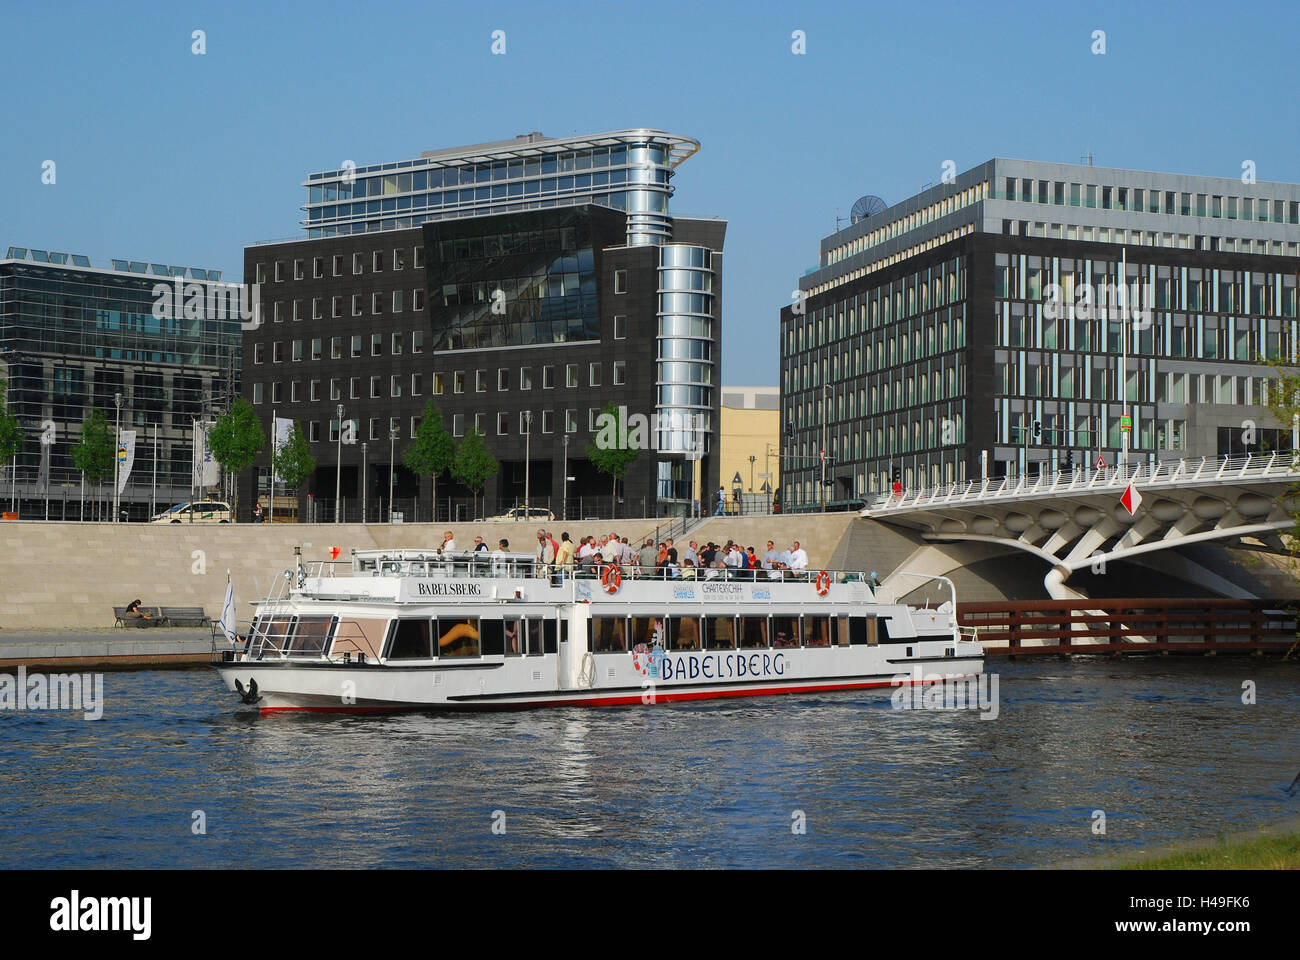 Germany, Berlin, Spree bow, excursion boat, building, facades, town, capital, Berlin middle, government district, Spree shore, house facades, architecture, glass fronts, administration buildings, the Spree, holiday ship, ship, boat, tourist, sightseeing, Stock Photo